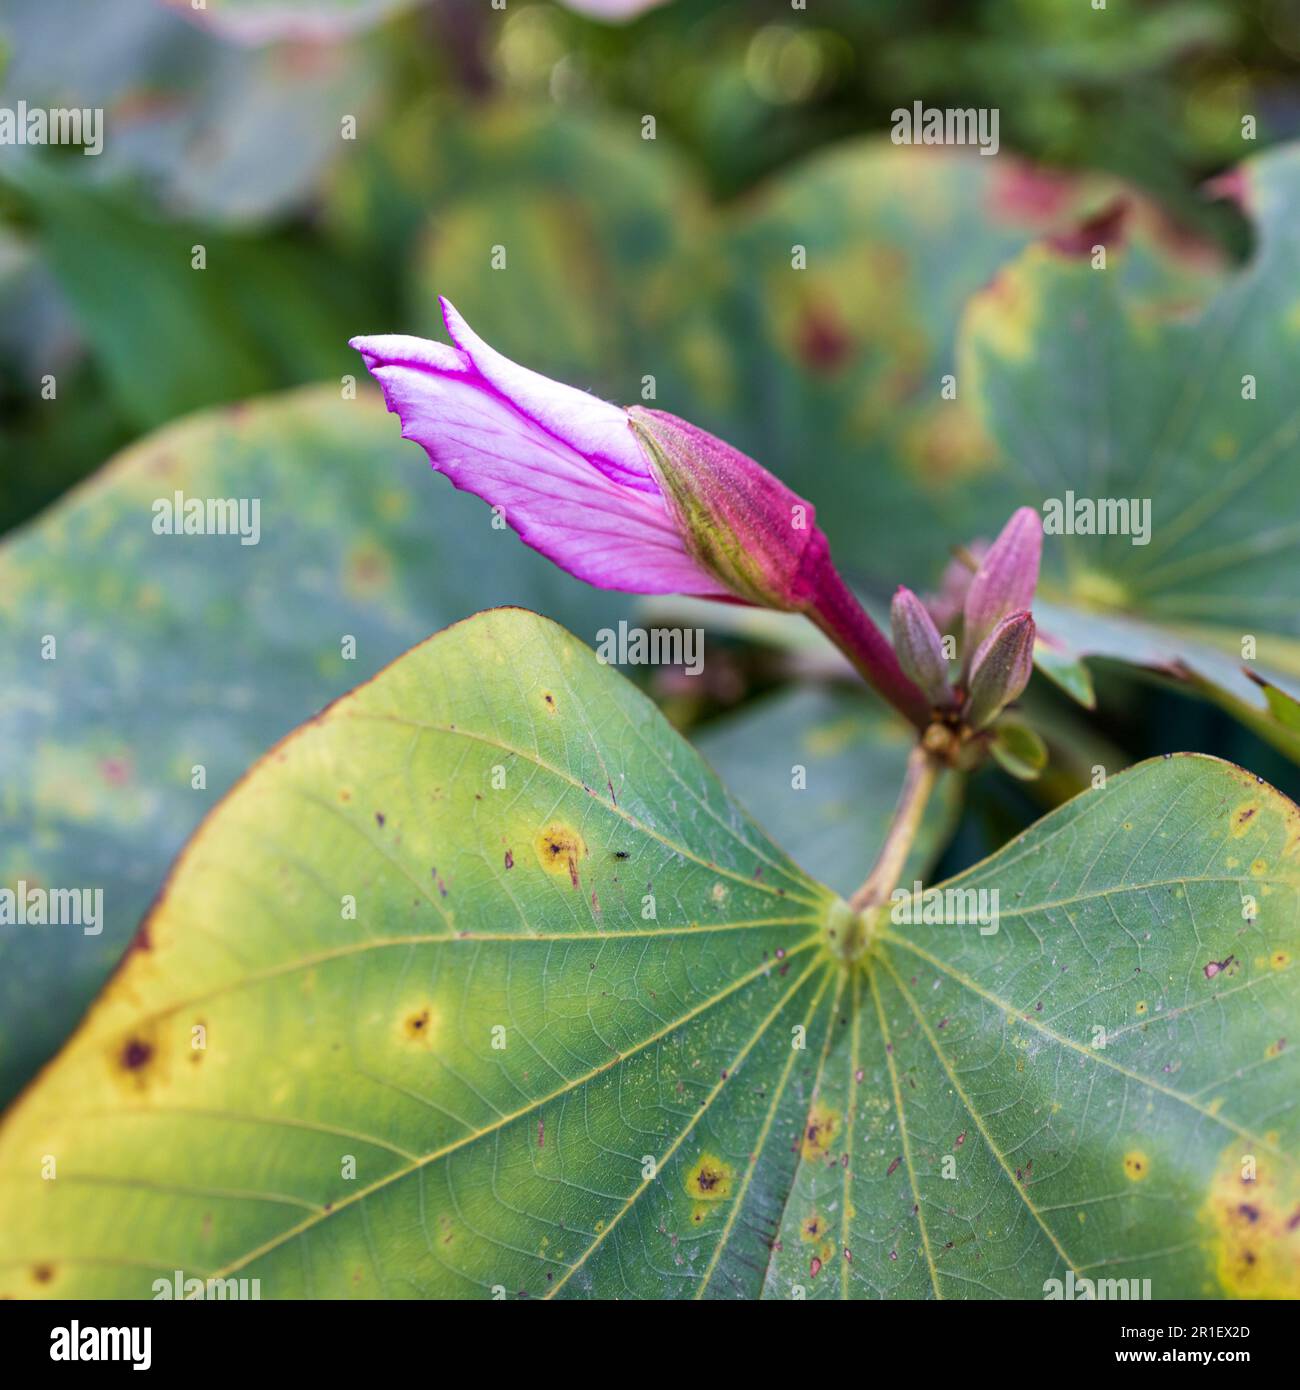 Bauhinia is a large genus of flowering plants in the subfamily Cercidoideae and tribe Bauhinieae, in the large flowering plant family Fabaceae, with a Stock Photo